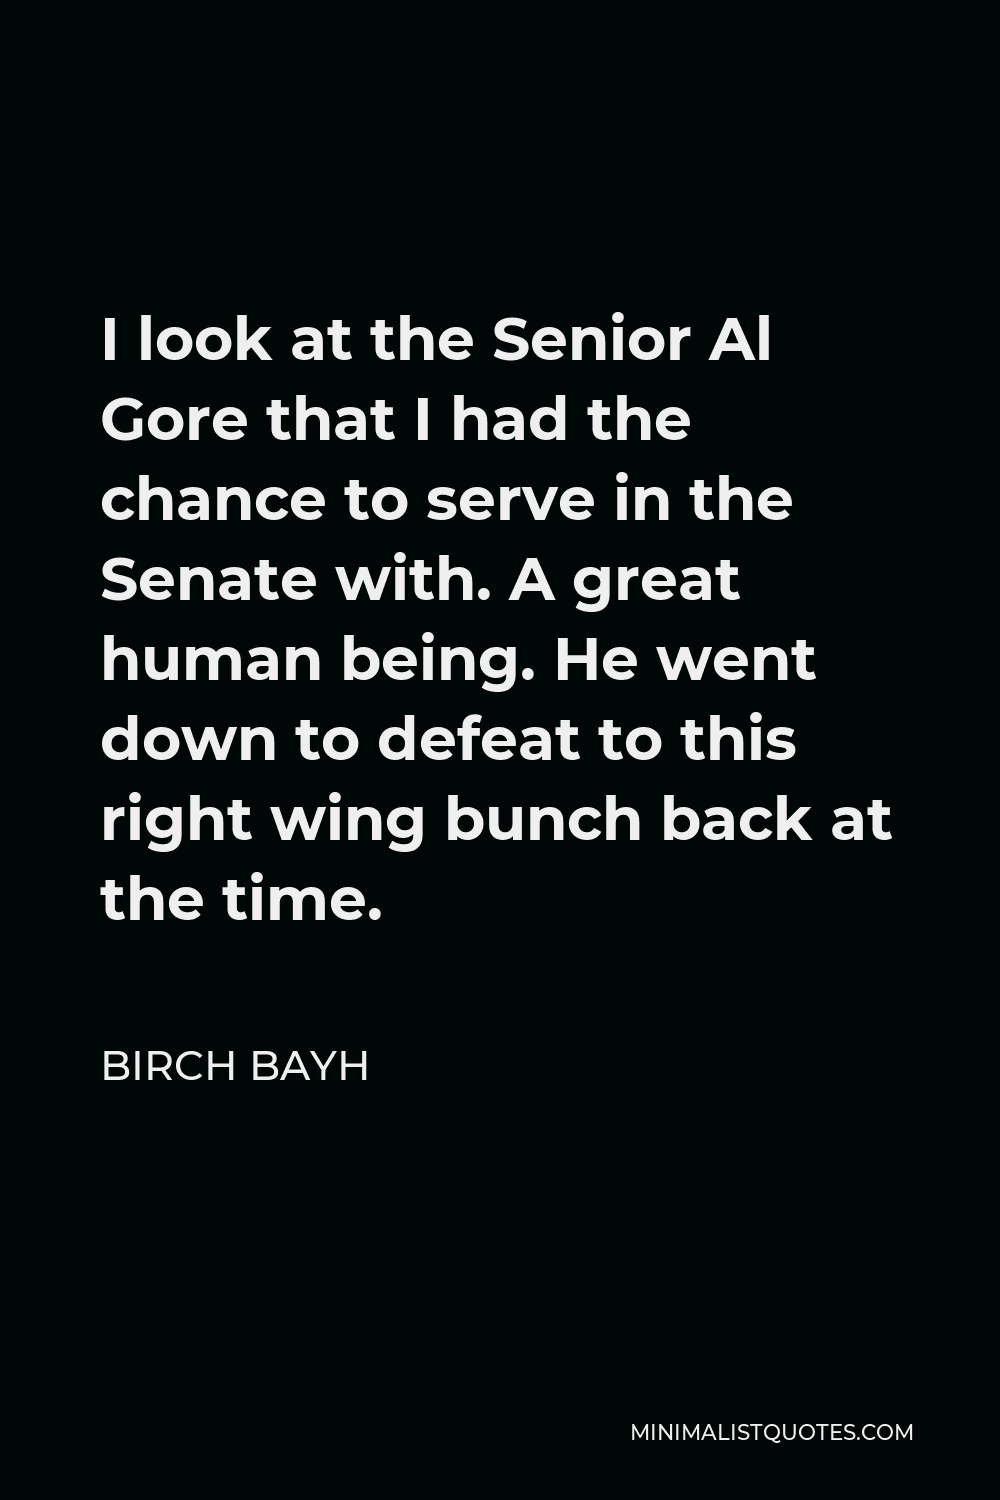 Birch Bayh Quote - I look at the Senior Al Gore that I had the chance to serve in the Senate with. A great human being. He went down to defeat to this right wing bunch back at the time.